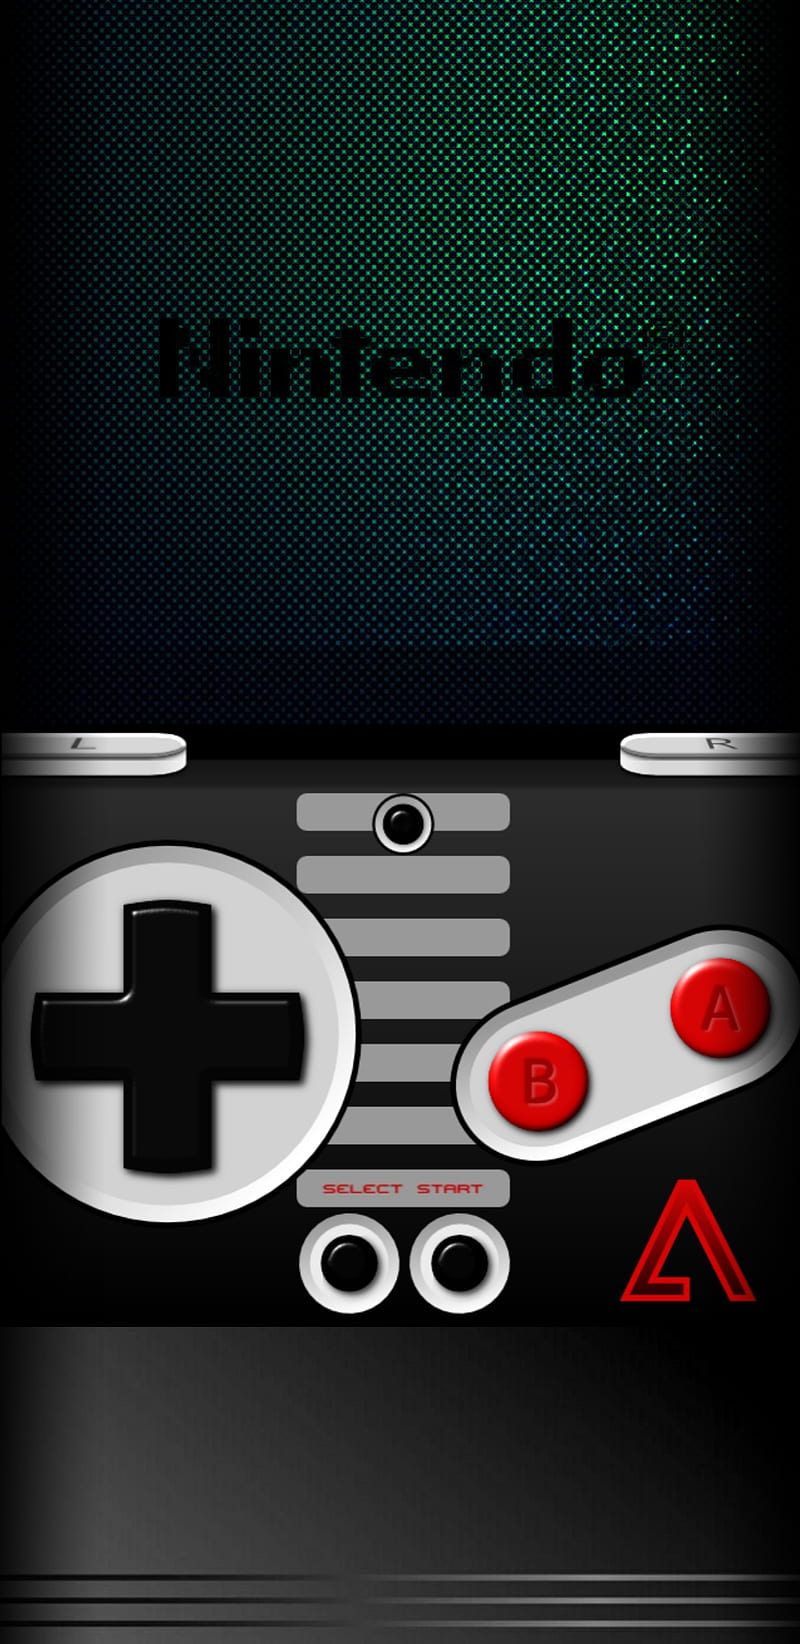 Retro Gamers Wallpaper by maumike5 on DeviantArt